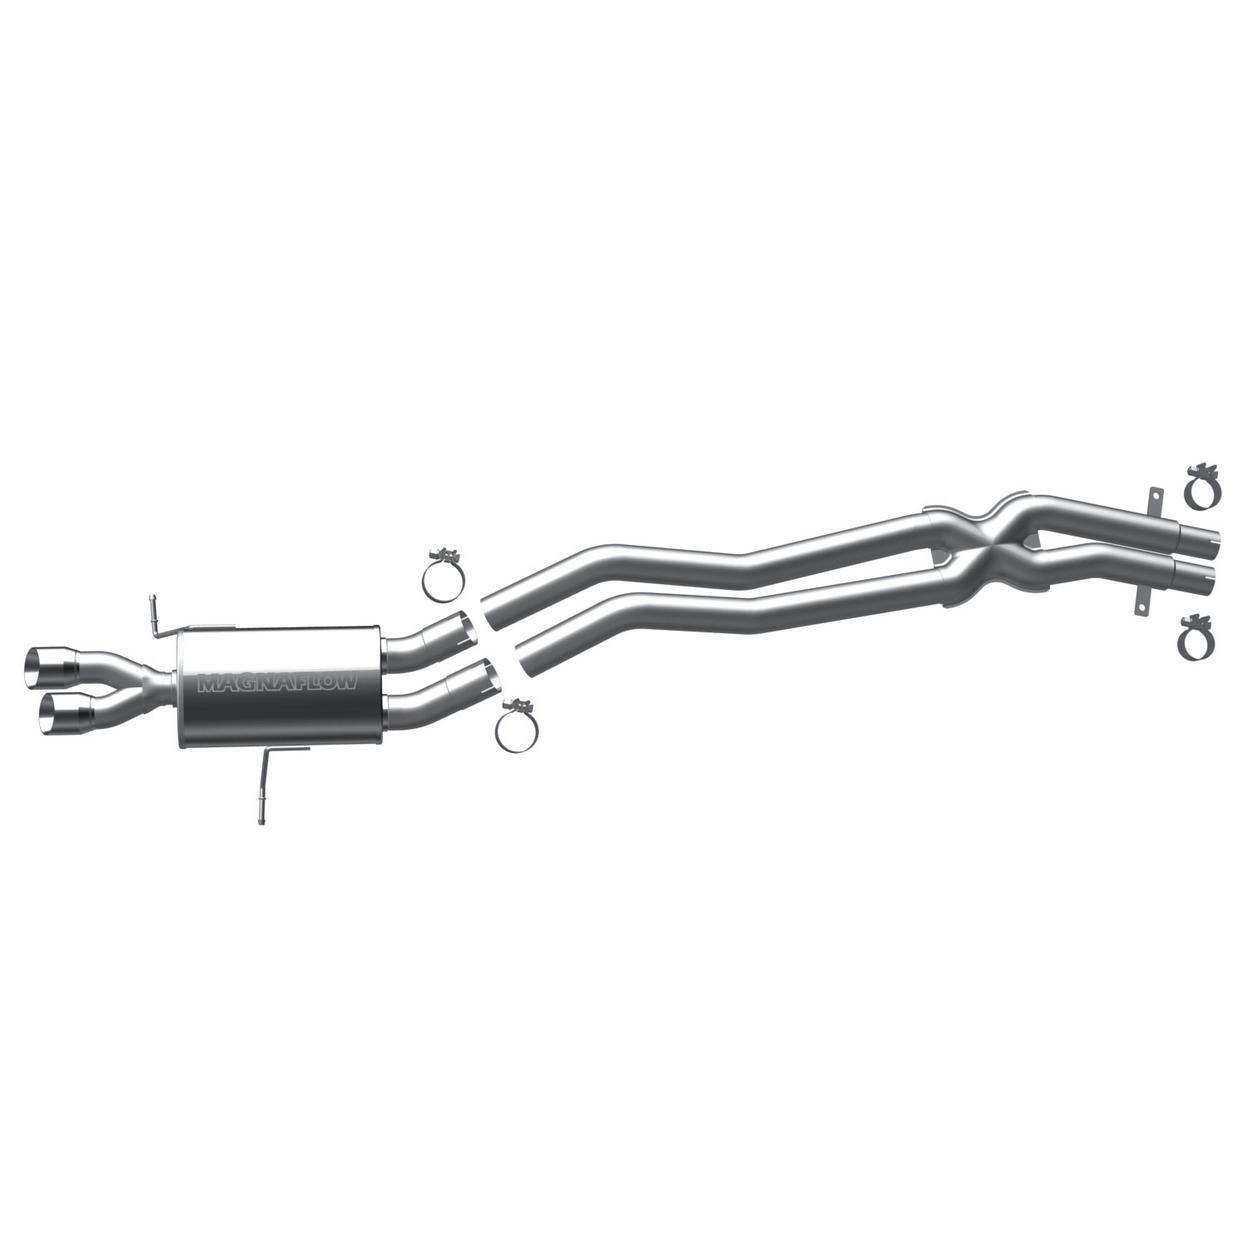 Magnaflow Exhaust System Kit for 2001-2004 BMW 325Ci